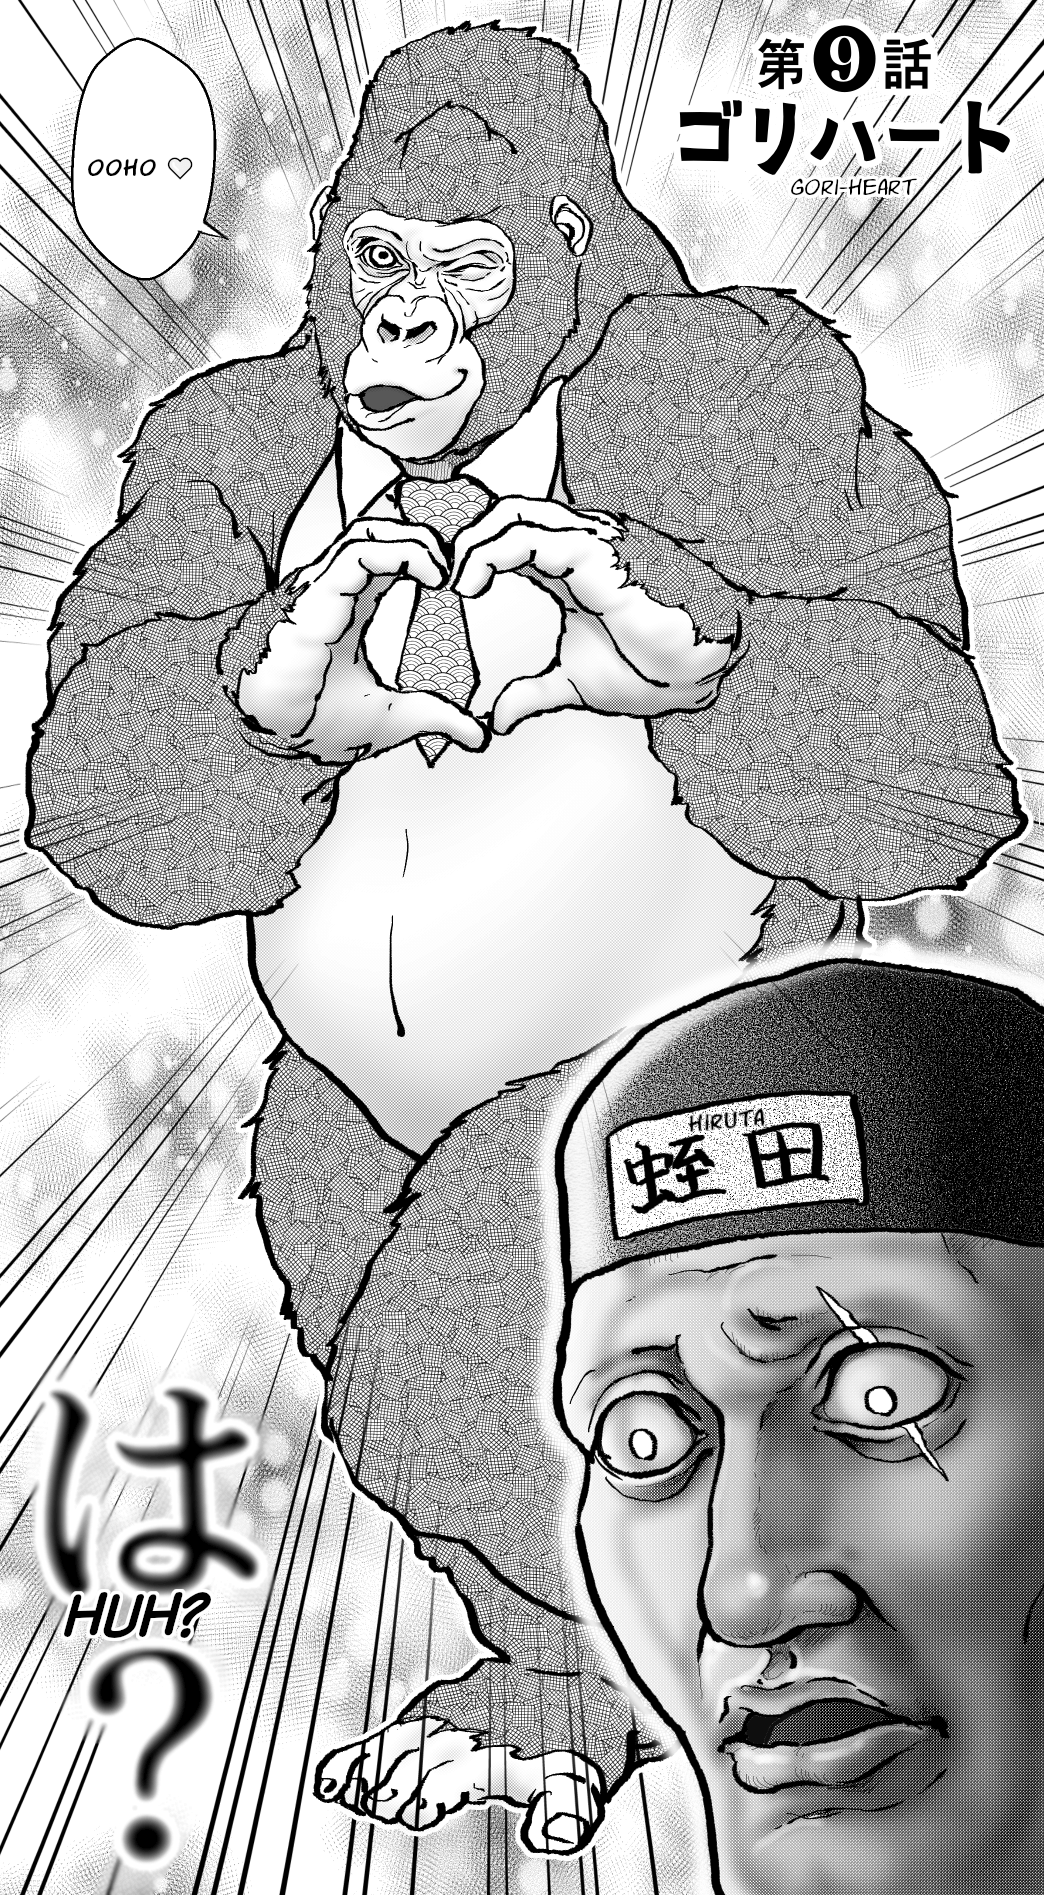 An Extremely Attractive Gorilla Chapter 9: Gori-Heart - Picture 3